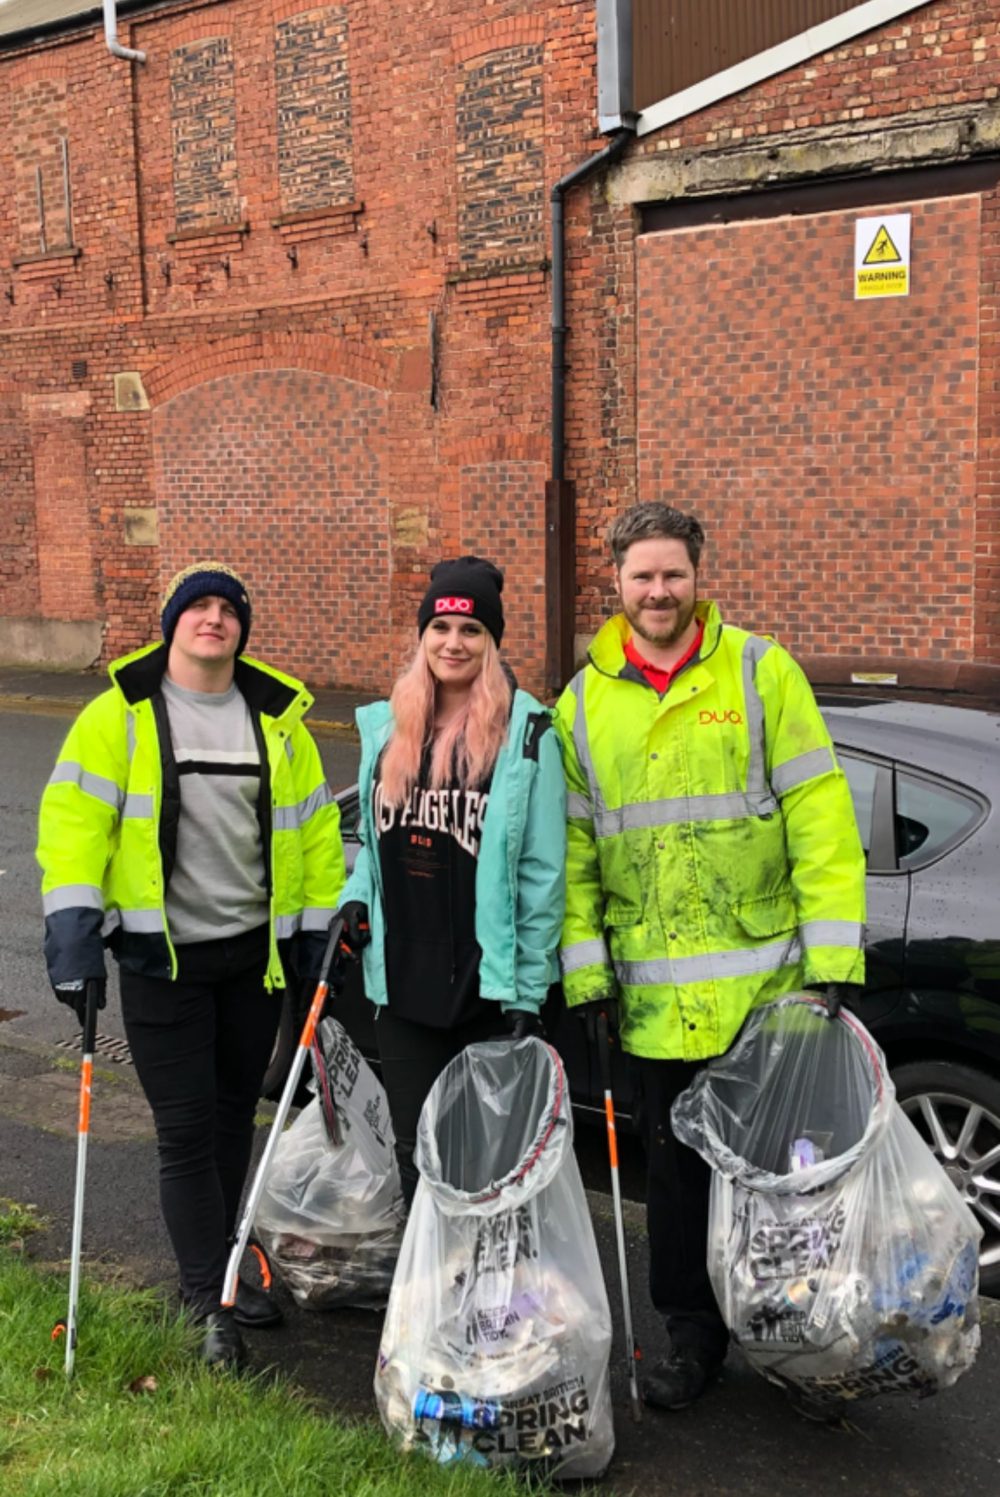 DuoUK team clean up the local community in Greater Manchester.